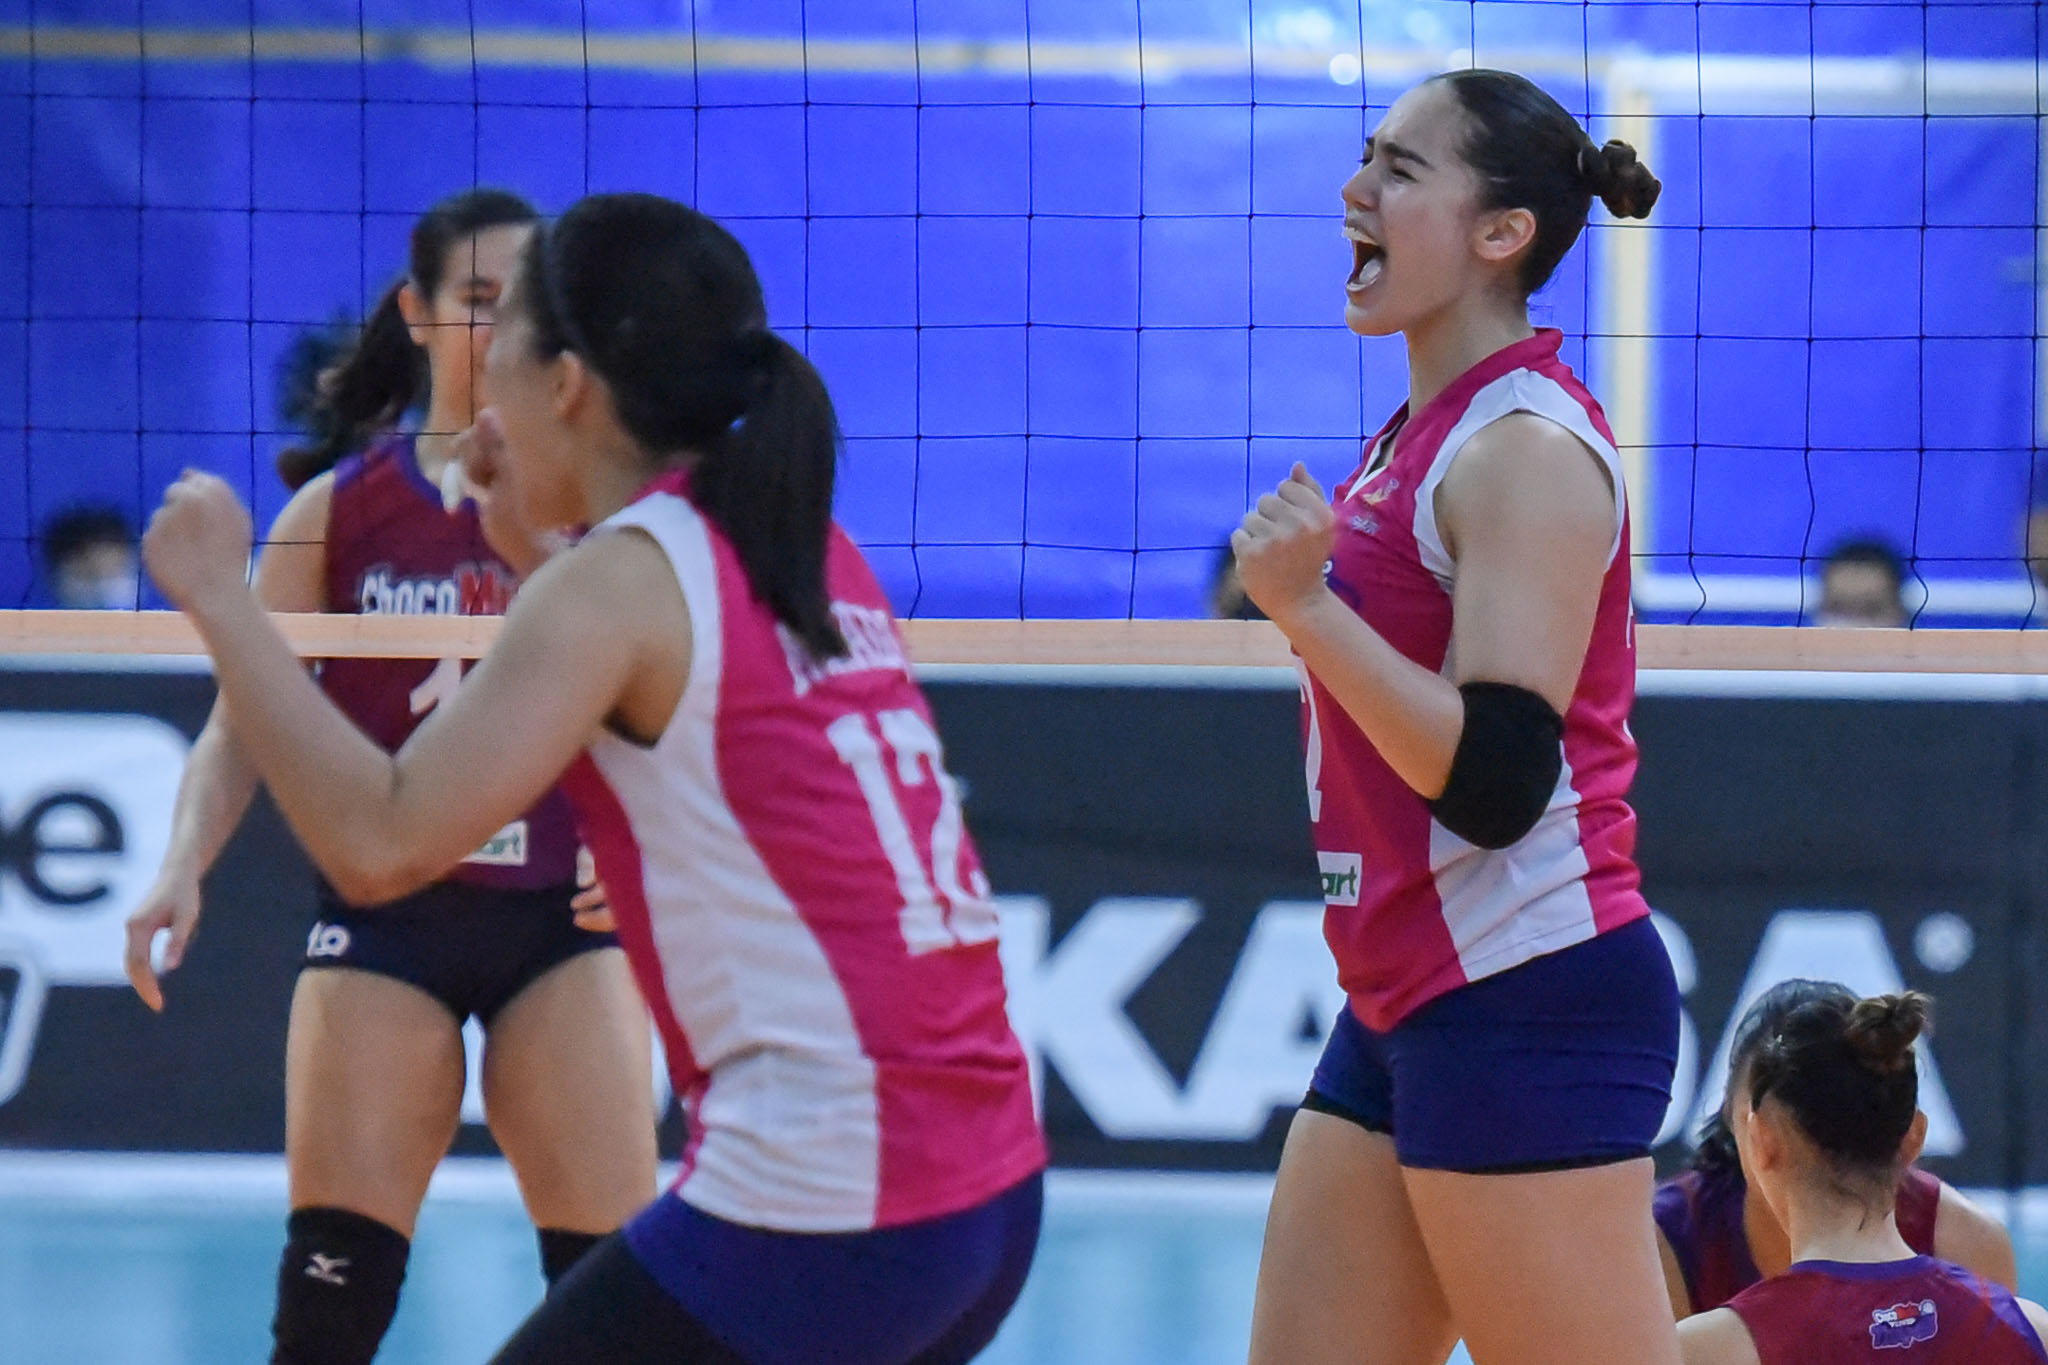 2021-PVL-Open-Creamline-vs.-Choco-Mucho-Michele-Gumabao-7868 Lorie Bernardo set to go pro, signs with Creamline News PVL UAAP UP Volleyball  - philippine sports news